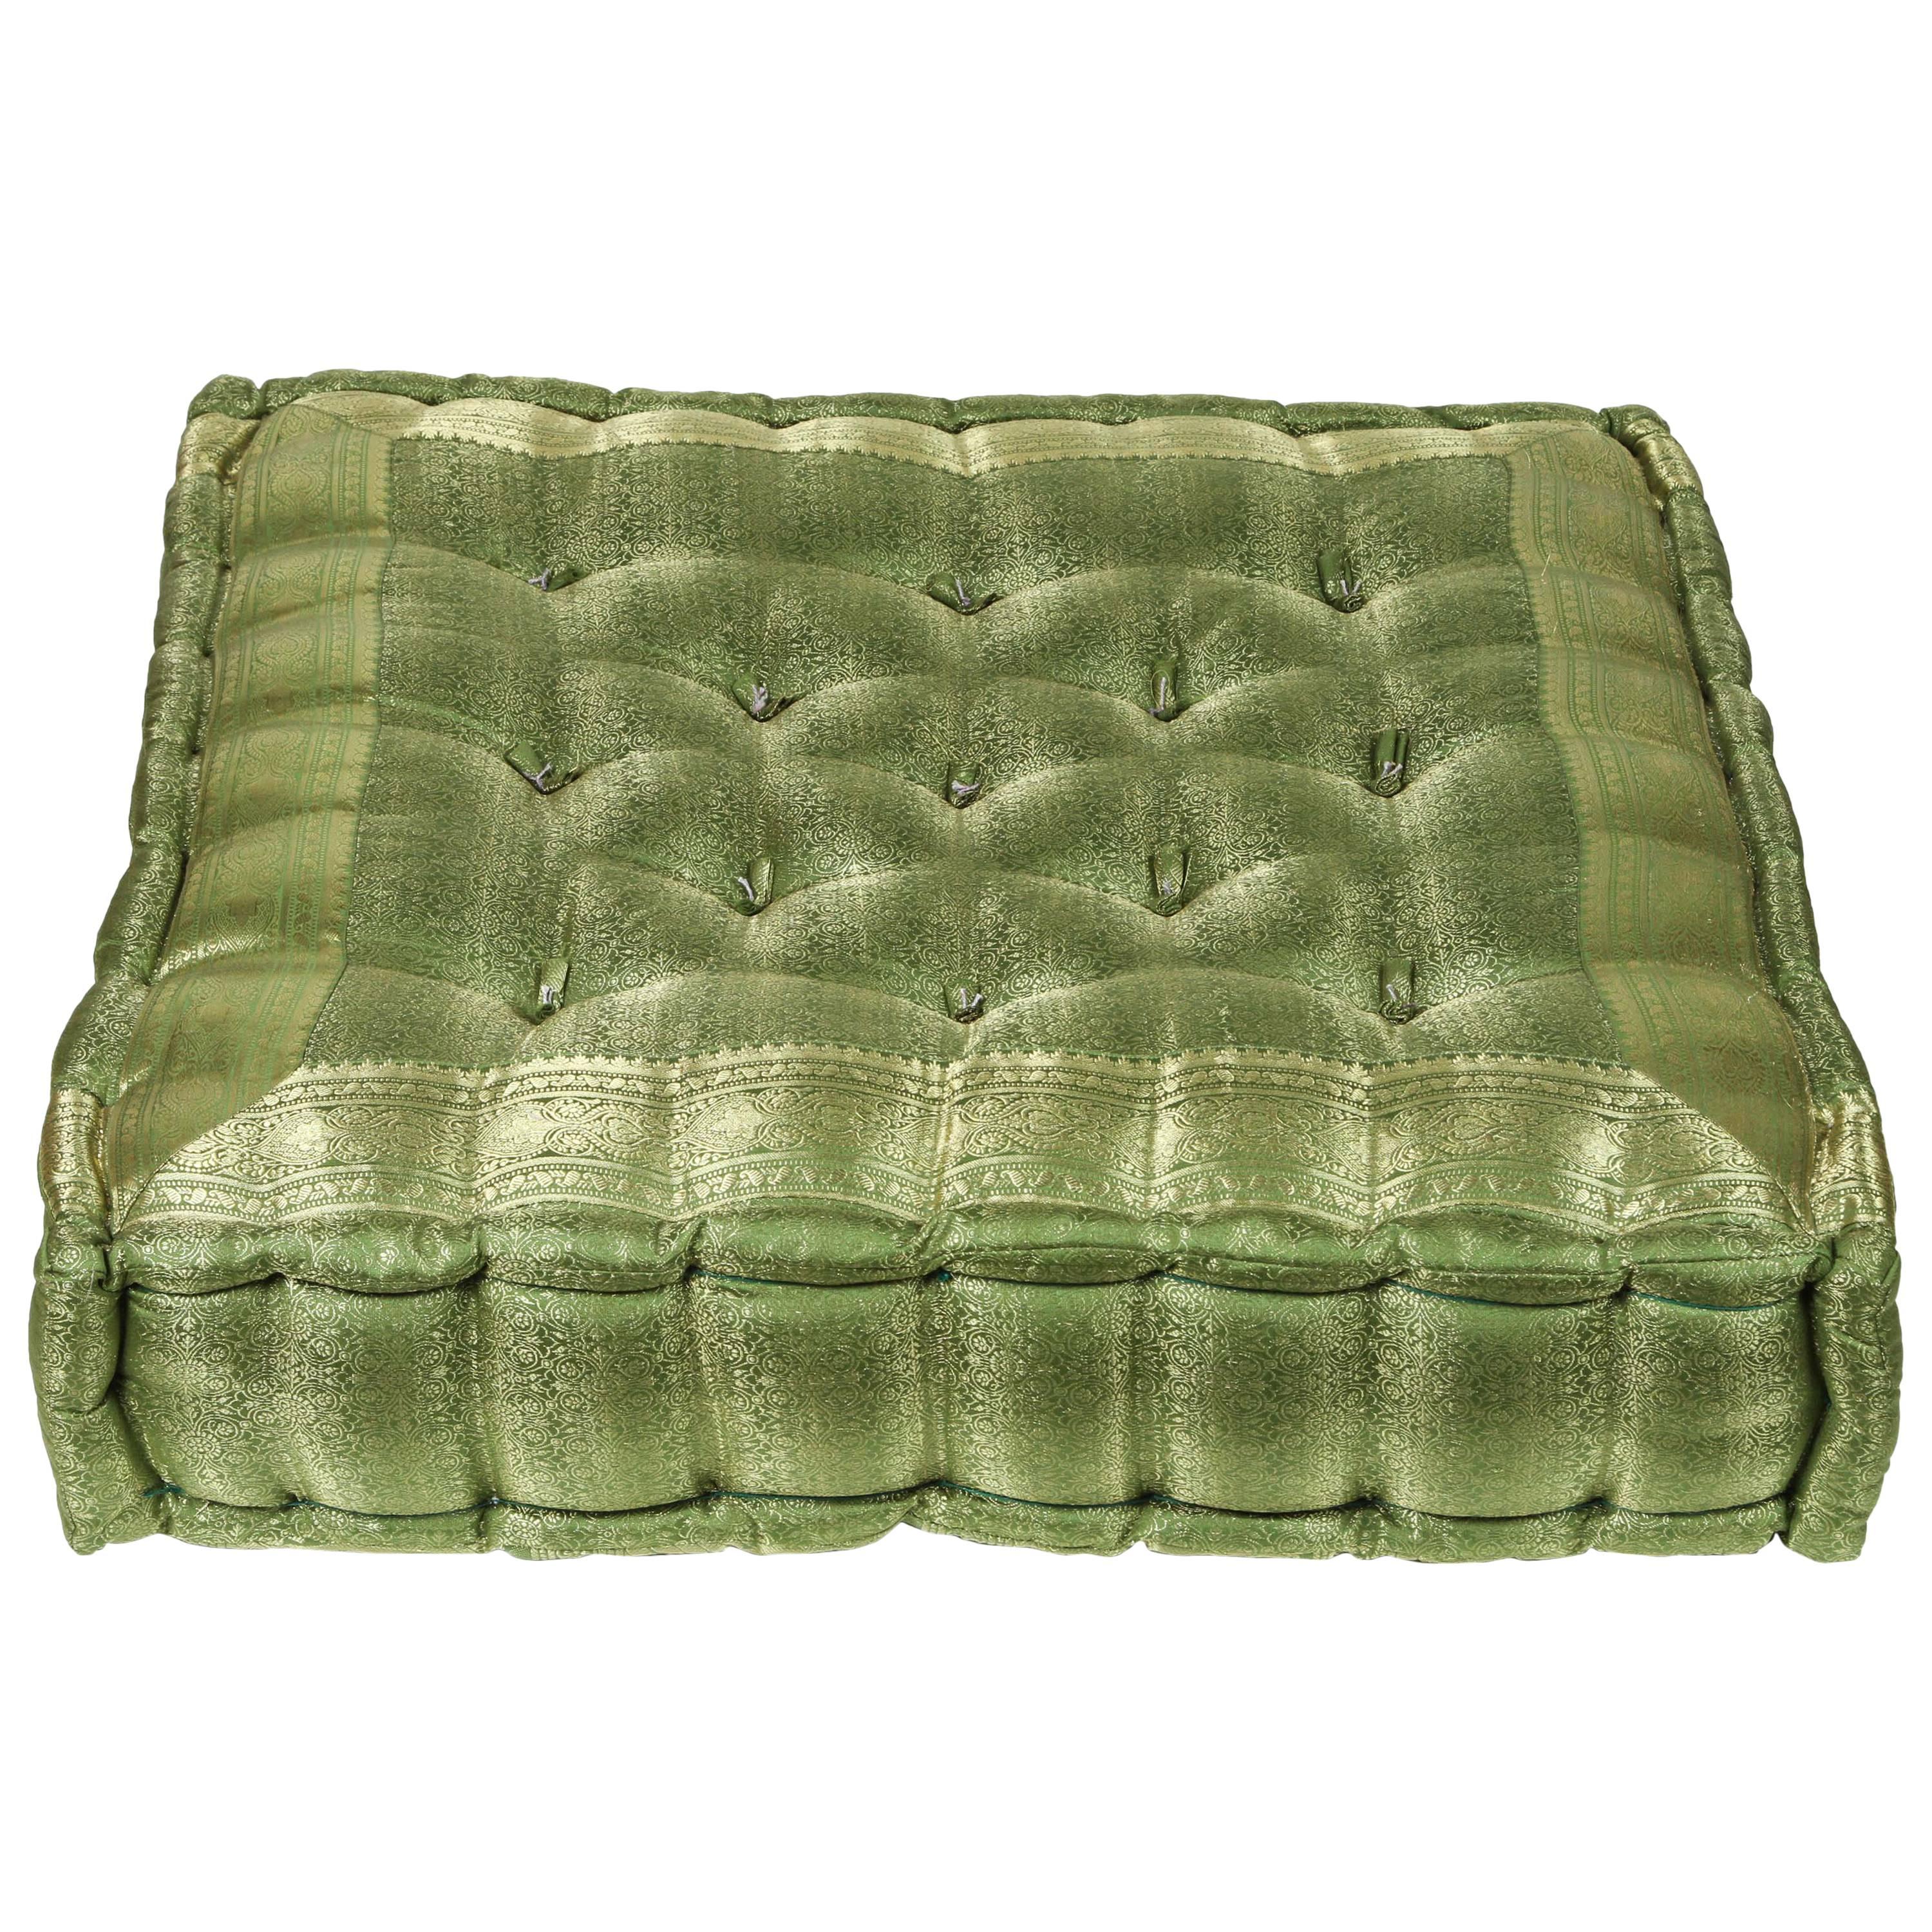 Oversized Silk Square Green Tufted Moroccan Floor Pillow Cushion